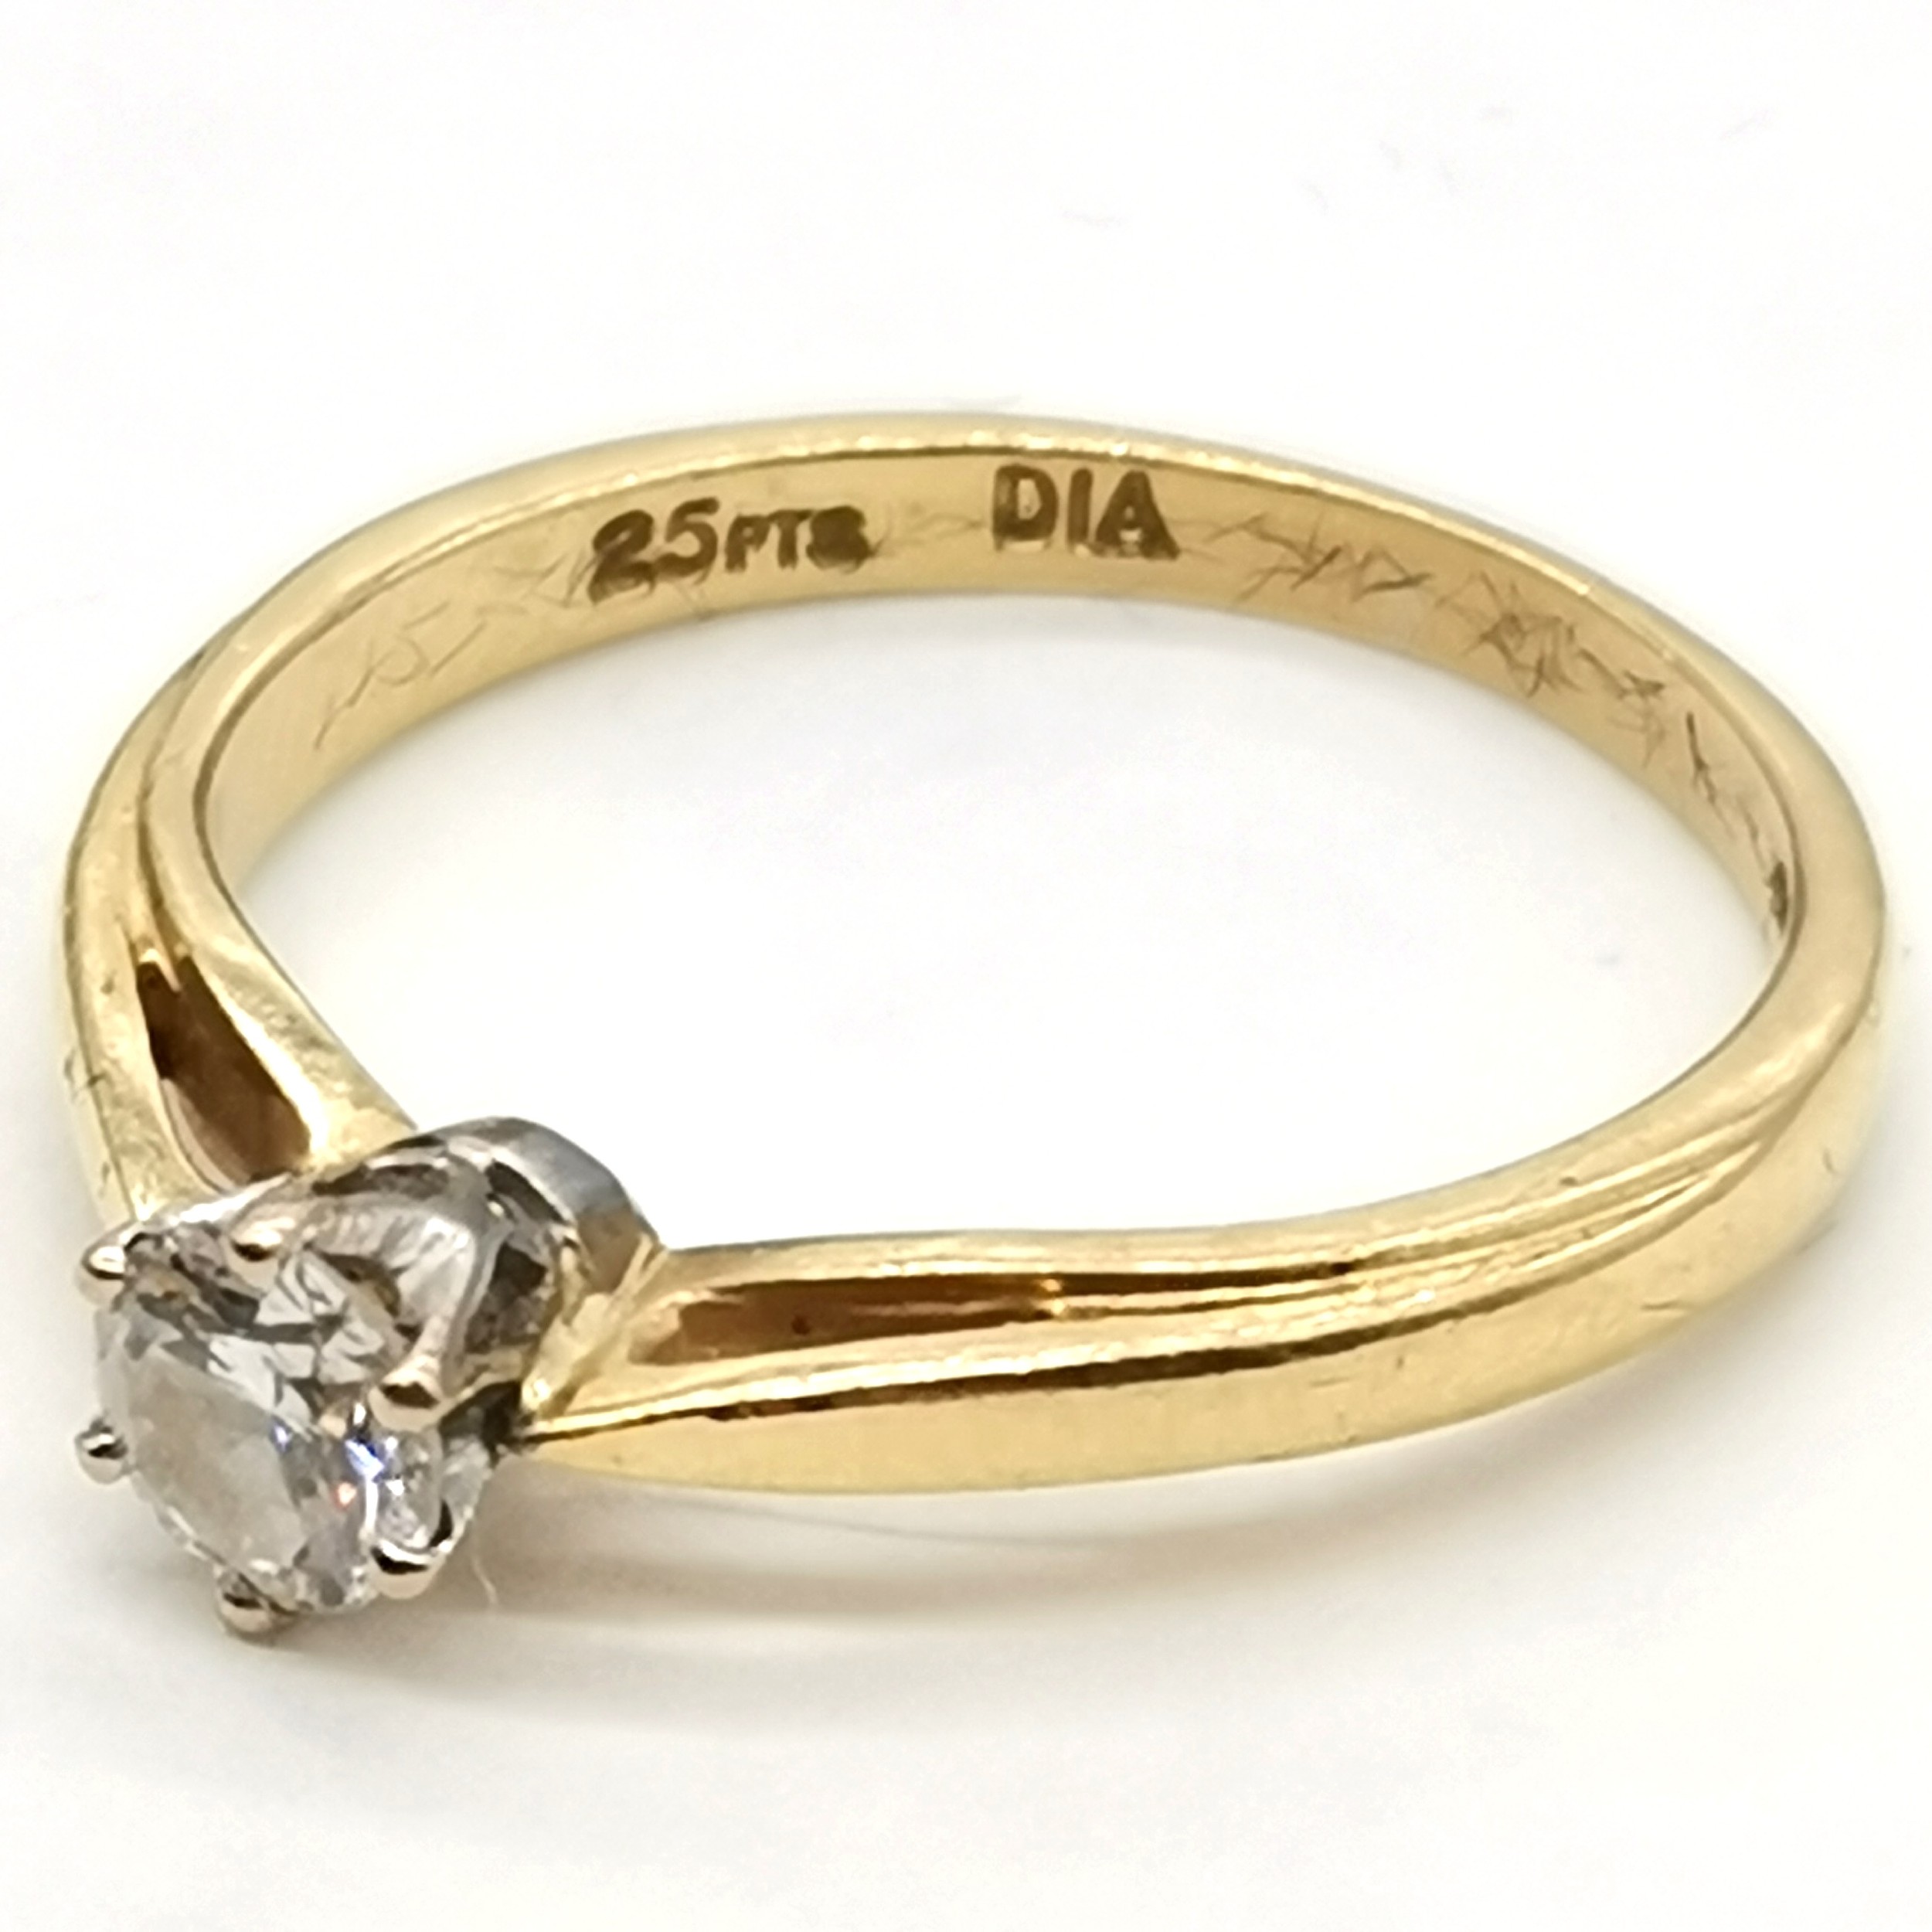 18ct hallmarked gold solitaire diamond ring - size L½ & 2.4g total weight ~ the diamond is approx - Image 3 of 4